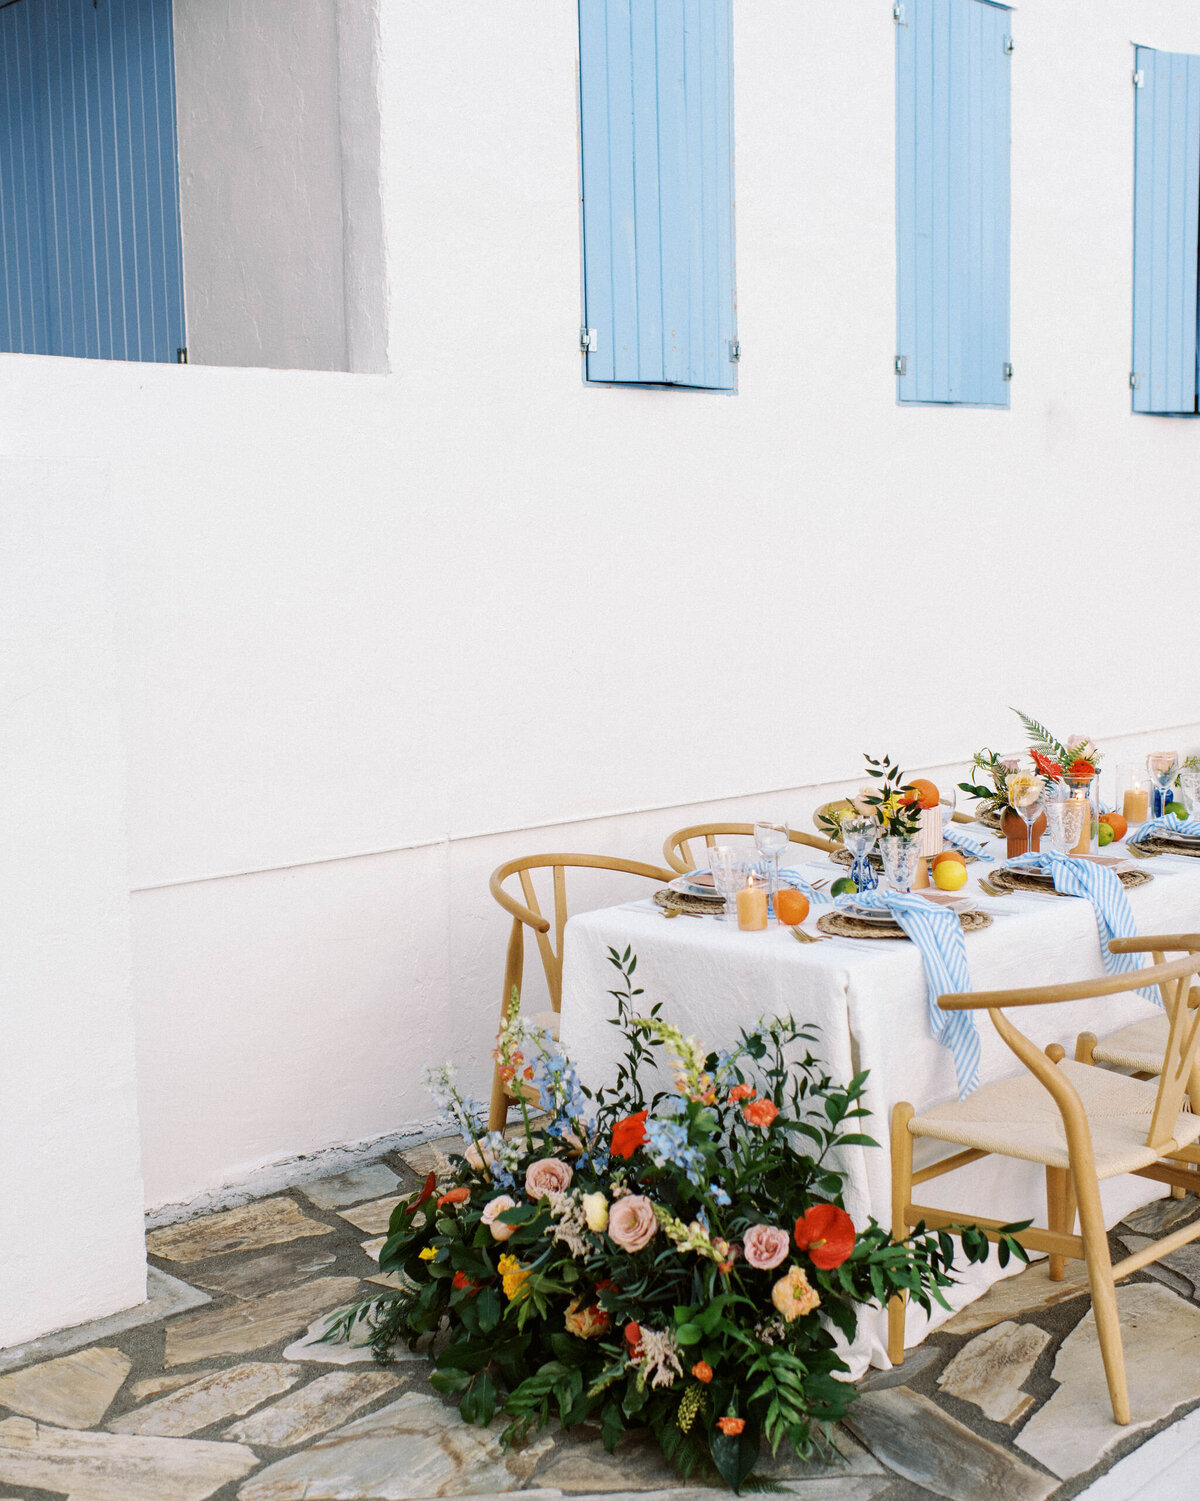 Portugal, Greece, and Spain Destination Wedding Inspiration, tropical and modern luxury wedding table design by Intimate Destination Wedding Planner Rebekah Bronte